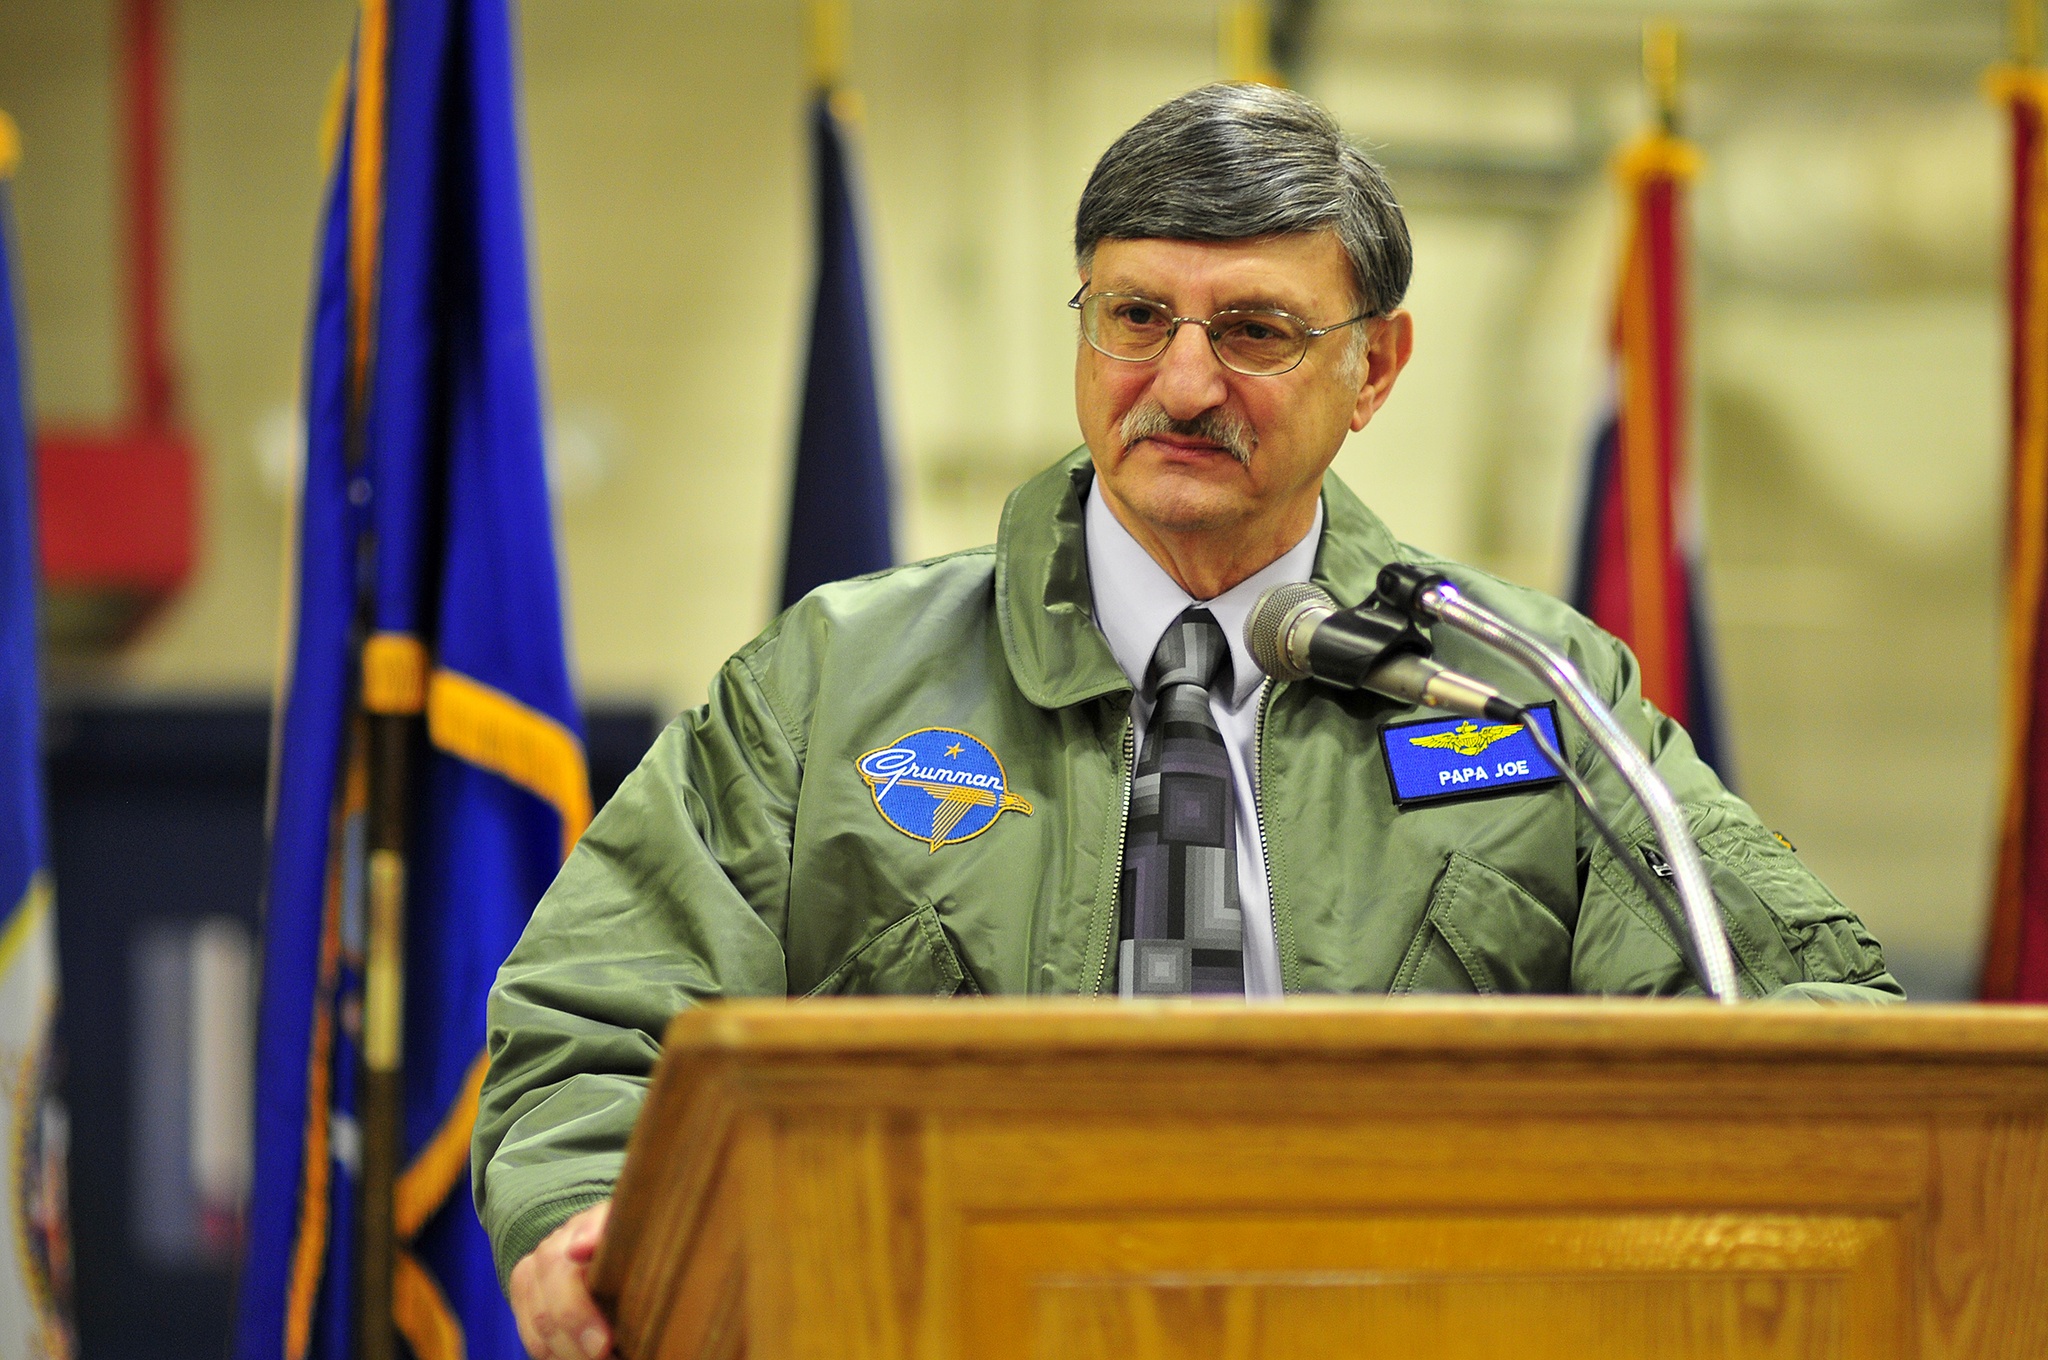 Joe Farina makes his remarks after receiving his new flight jacket and designation as the 29th Honorary Naval Aviator during his surprise retirement parry Jan 13, at NAS Whidbey Island.                                Joe Farina makes his remarks after receiving his new flight jacket and designation as the 29th Honorary Naval Aviator during his surprise retirement parry Jan 13, at NAS Whidbey Island.